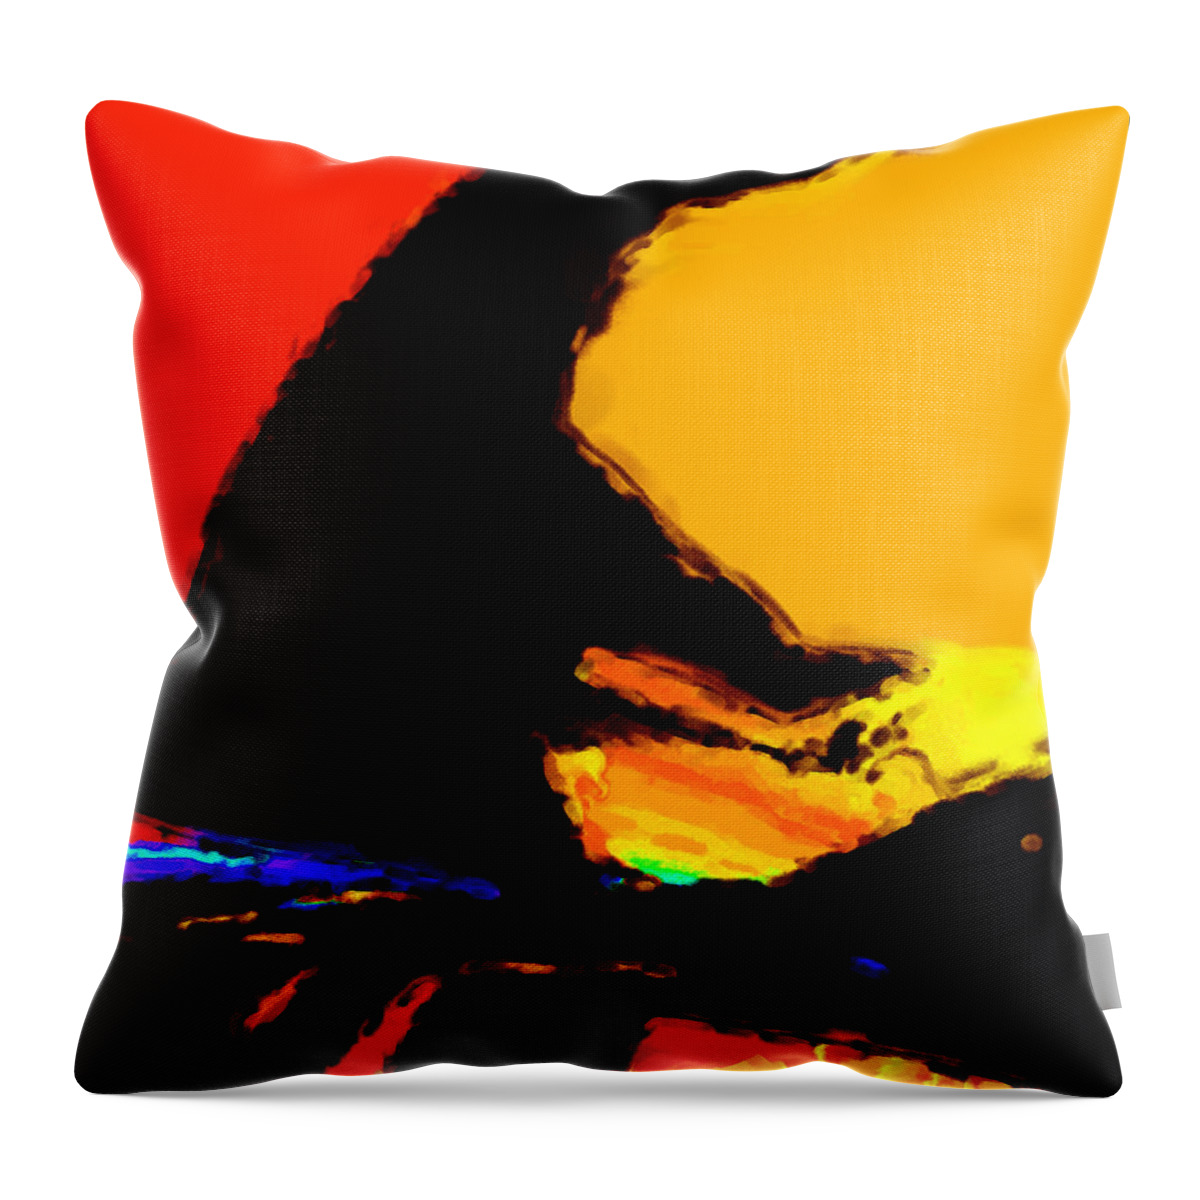 Abstract Throw Pillow featuring the digital art The Pianist by Richard Rizzo